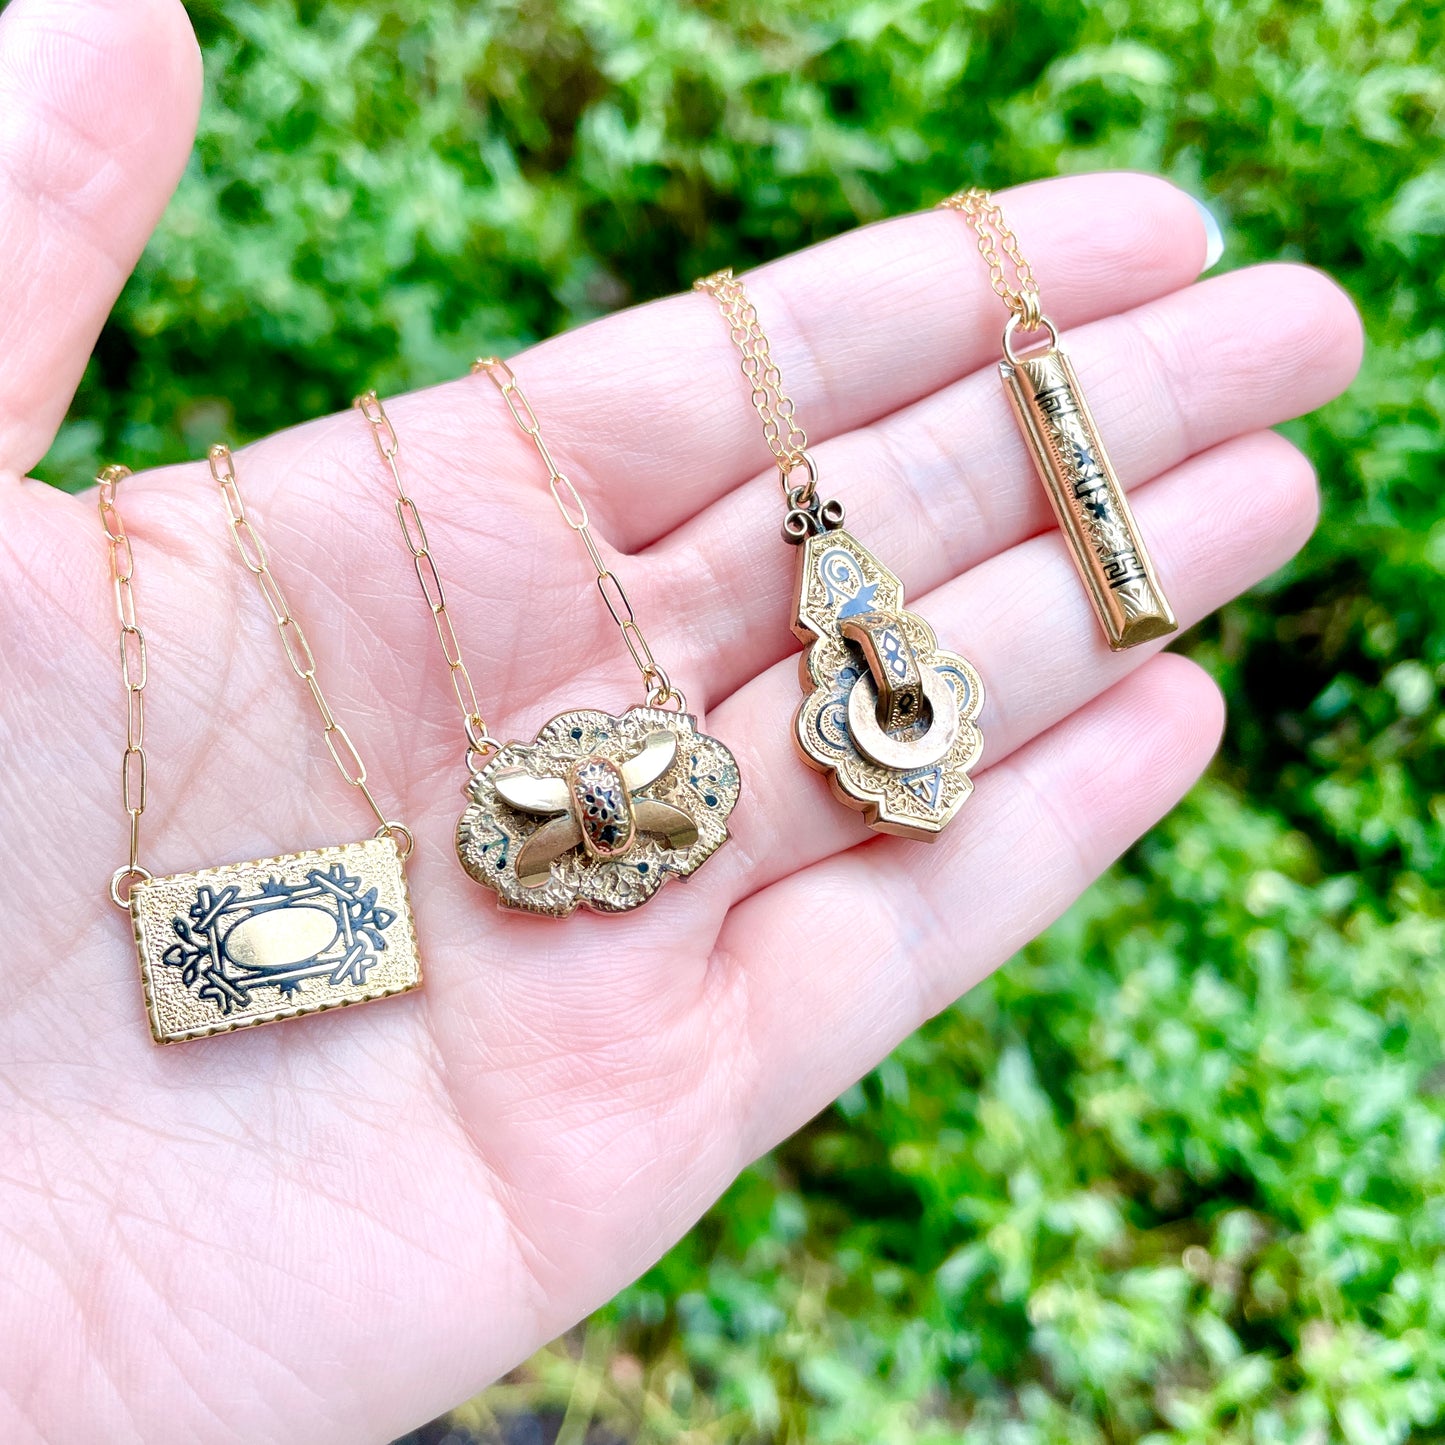 Repurposed antique victorian brooch pin conversion necklaces with 14k gold filled chains